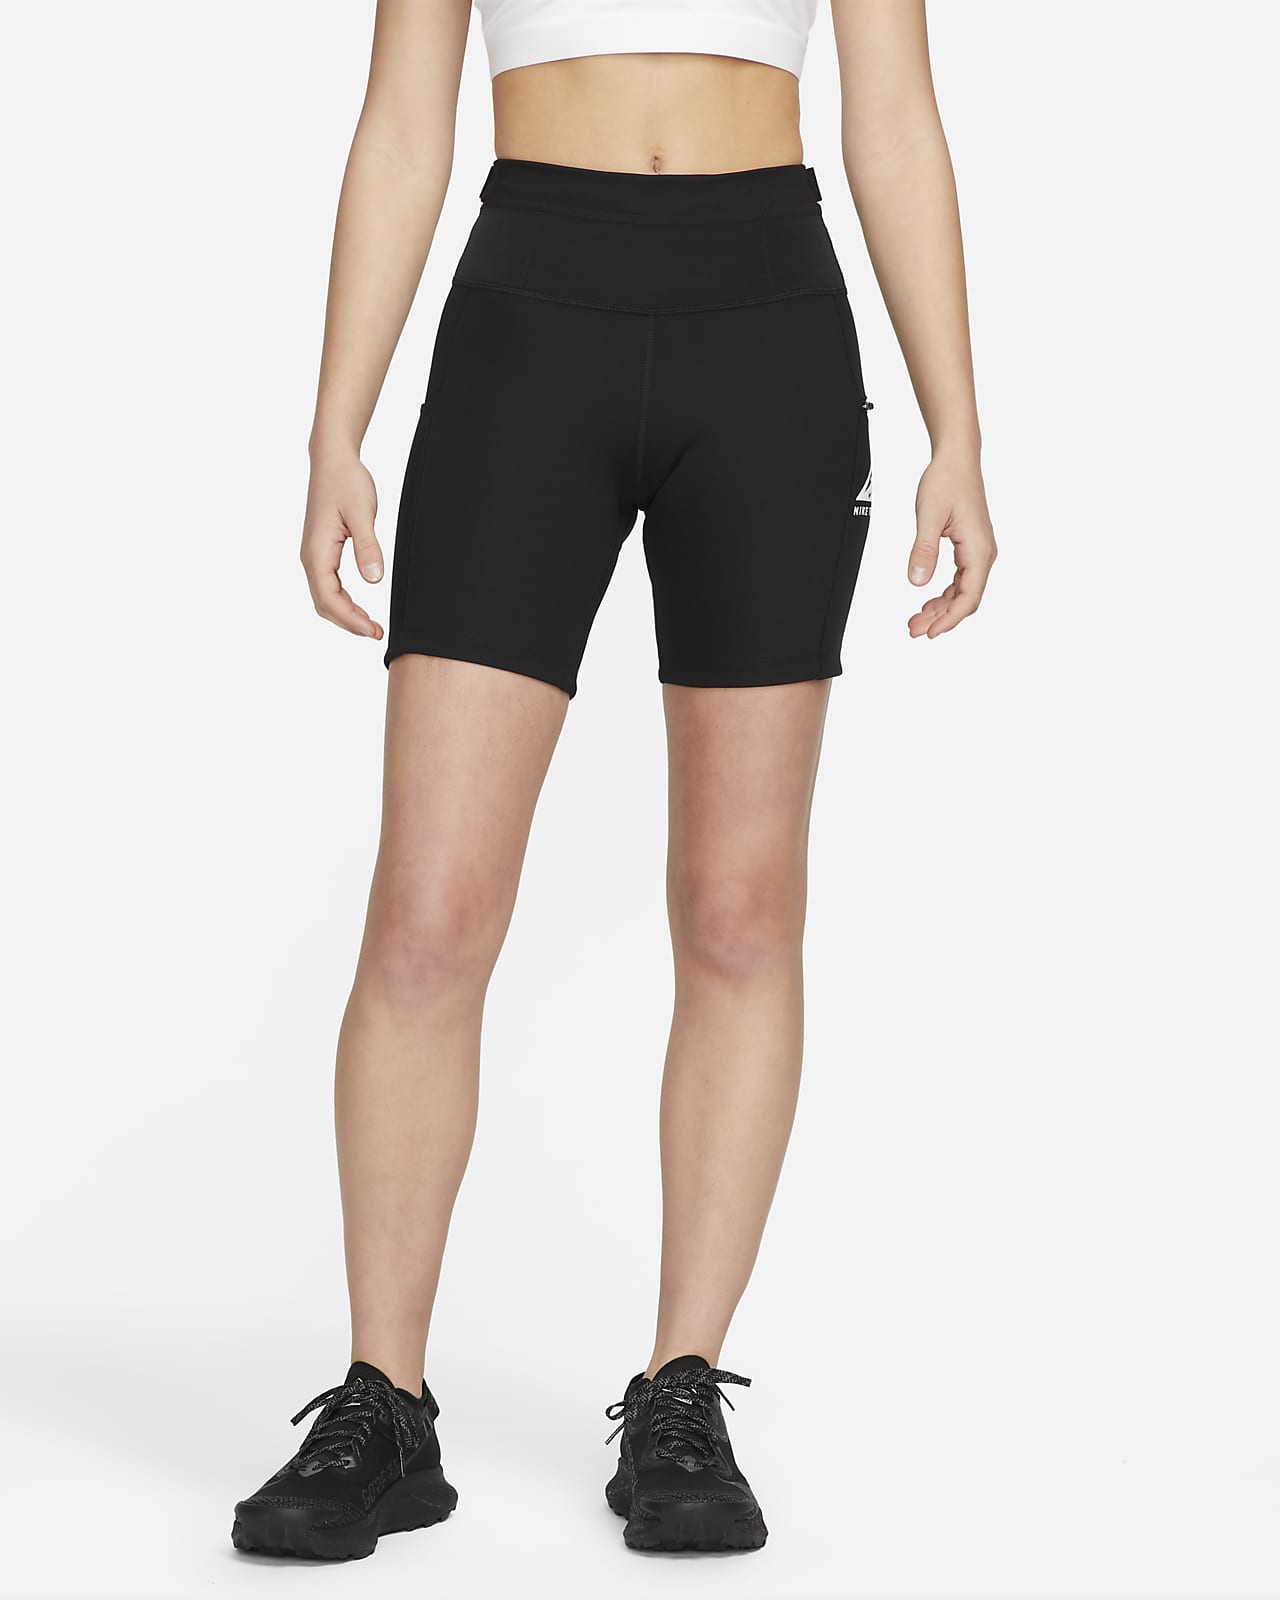 Nike Dri-FIT Epic Luxe Women's Trail Running Tight Shorts